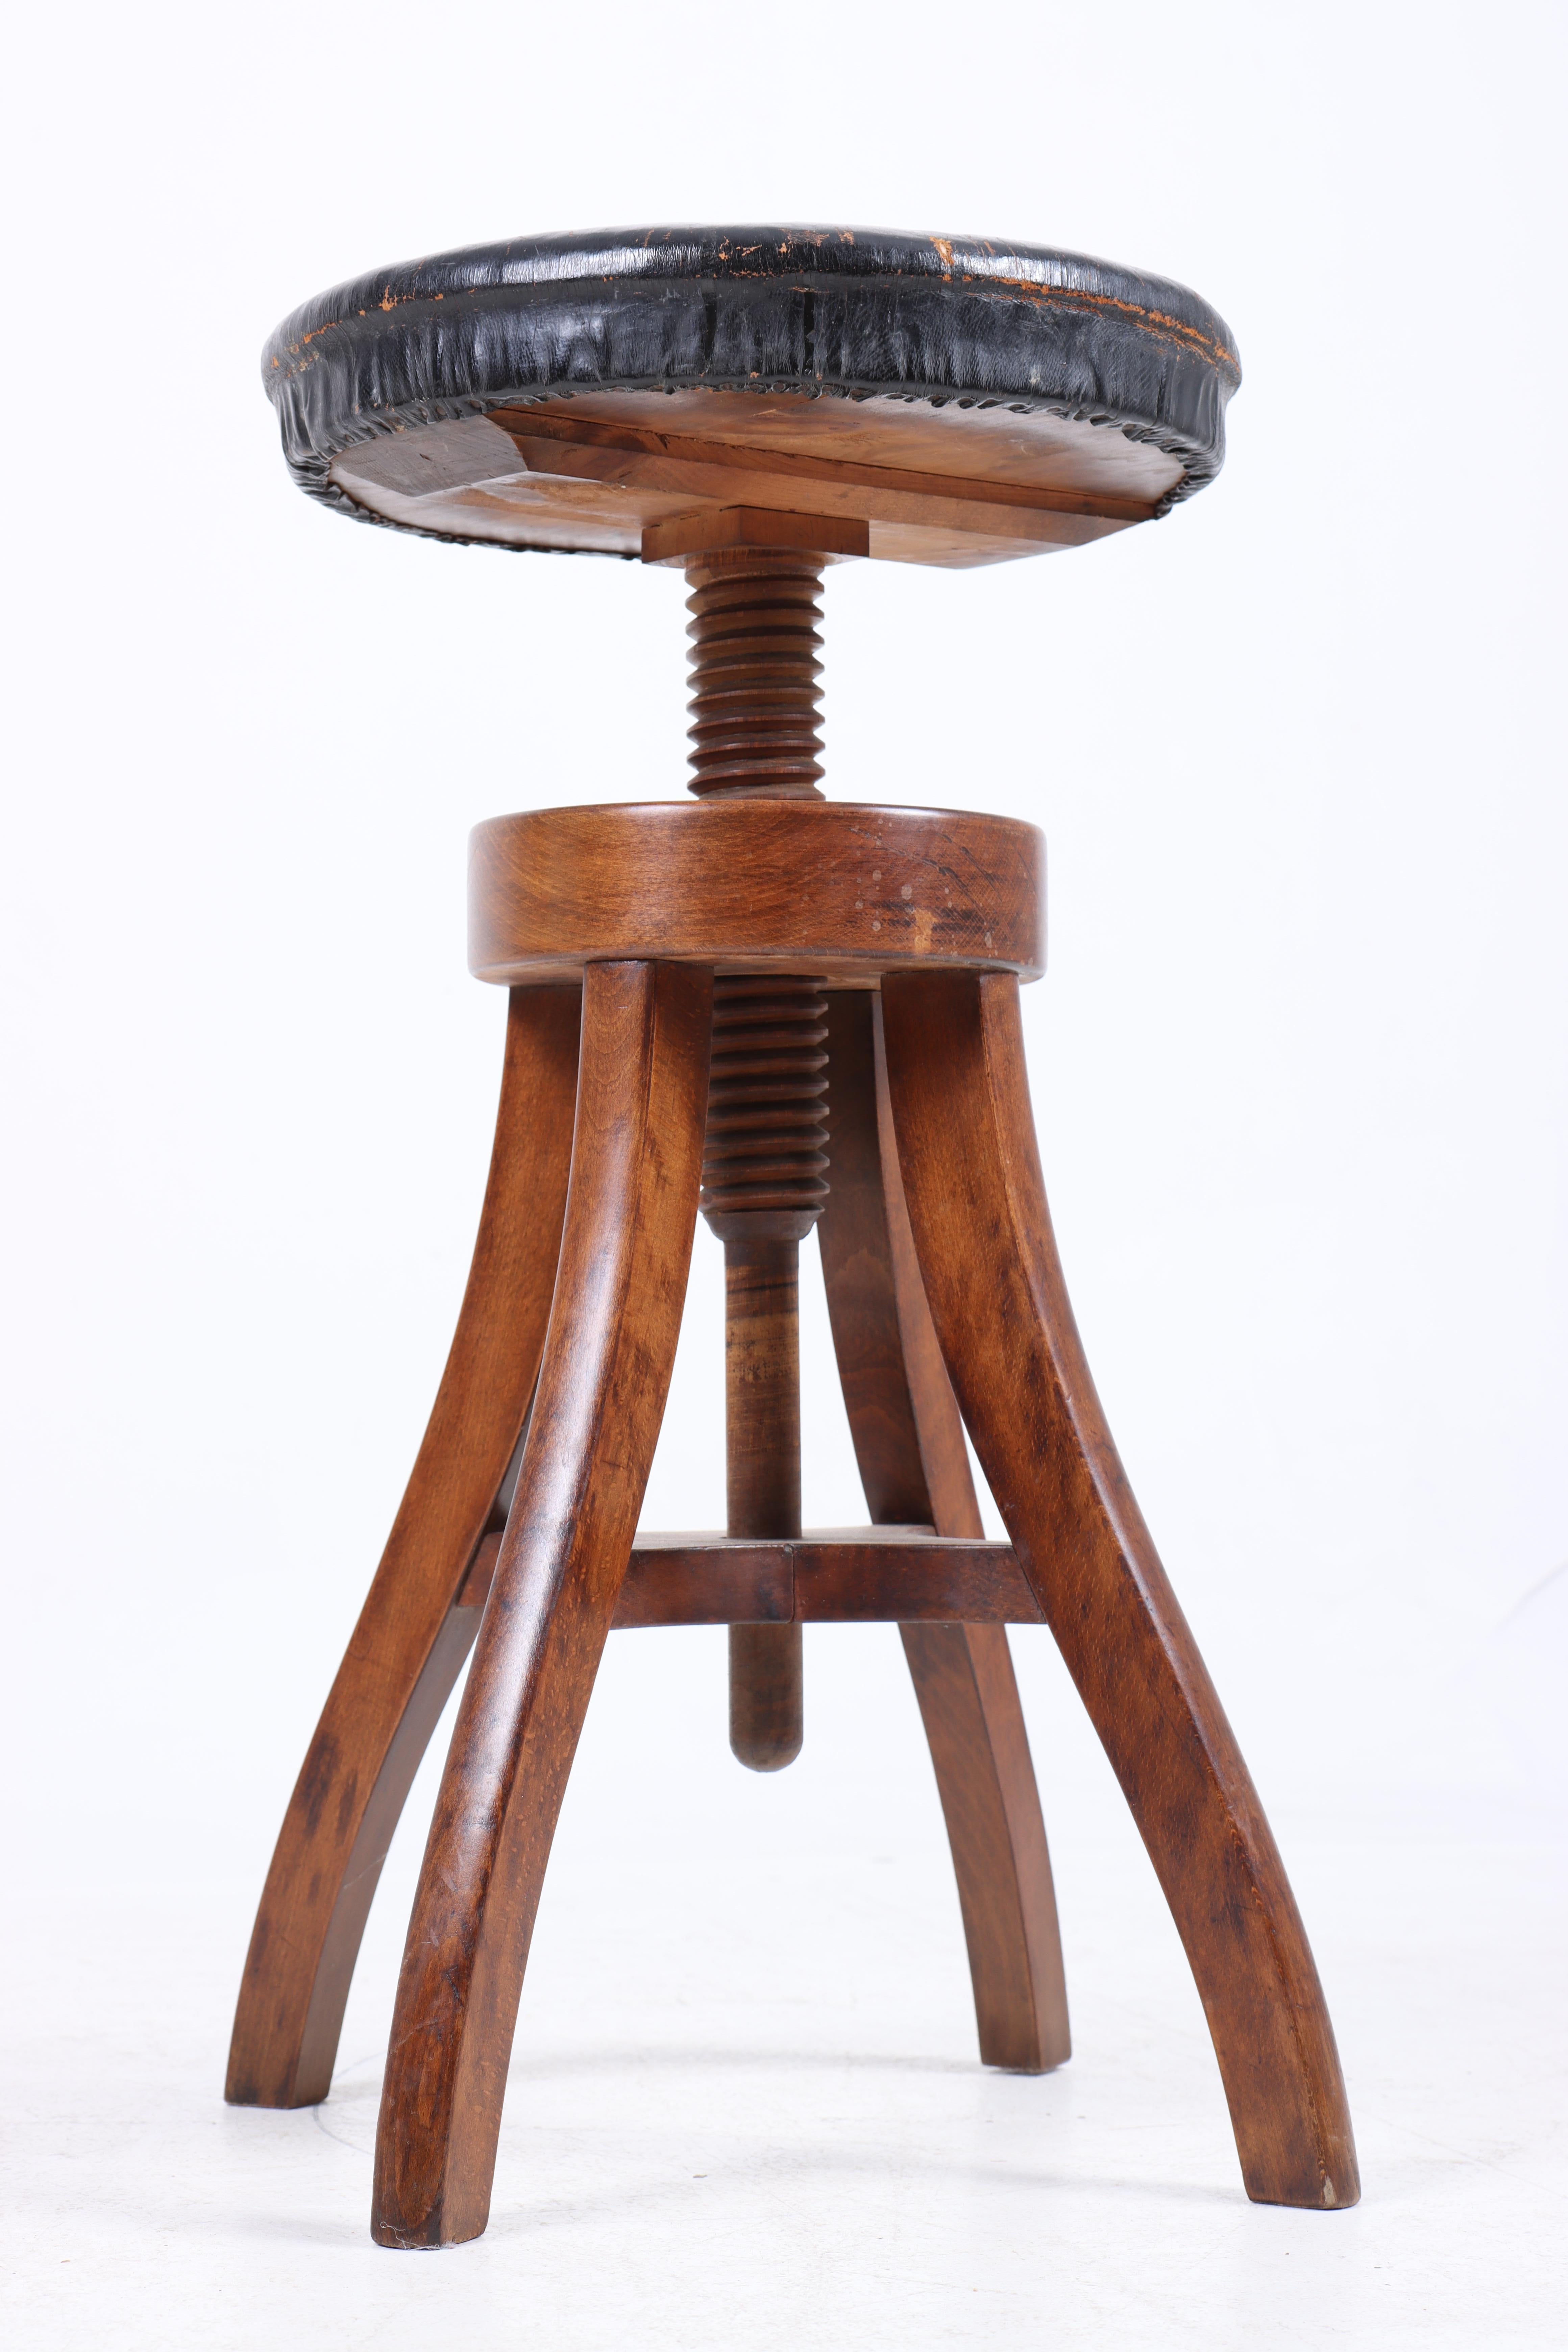 Mid-20th Century Adjustable Artist Stool in Oak and Patinated Leather, Denmark, 1930s